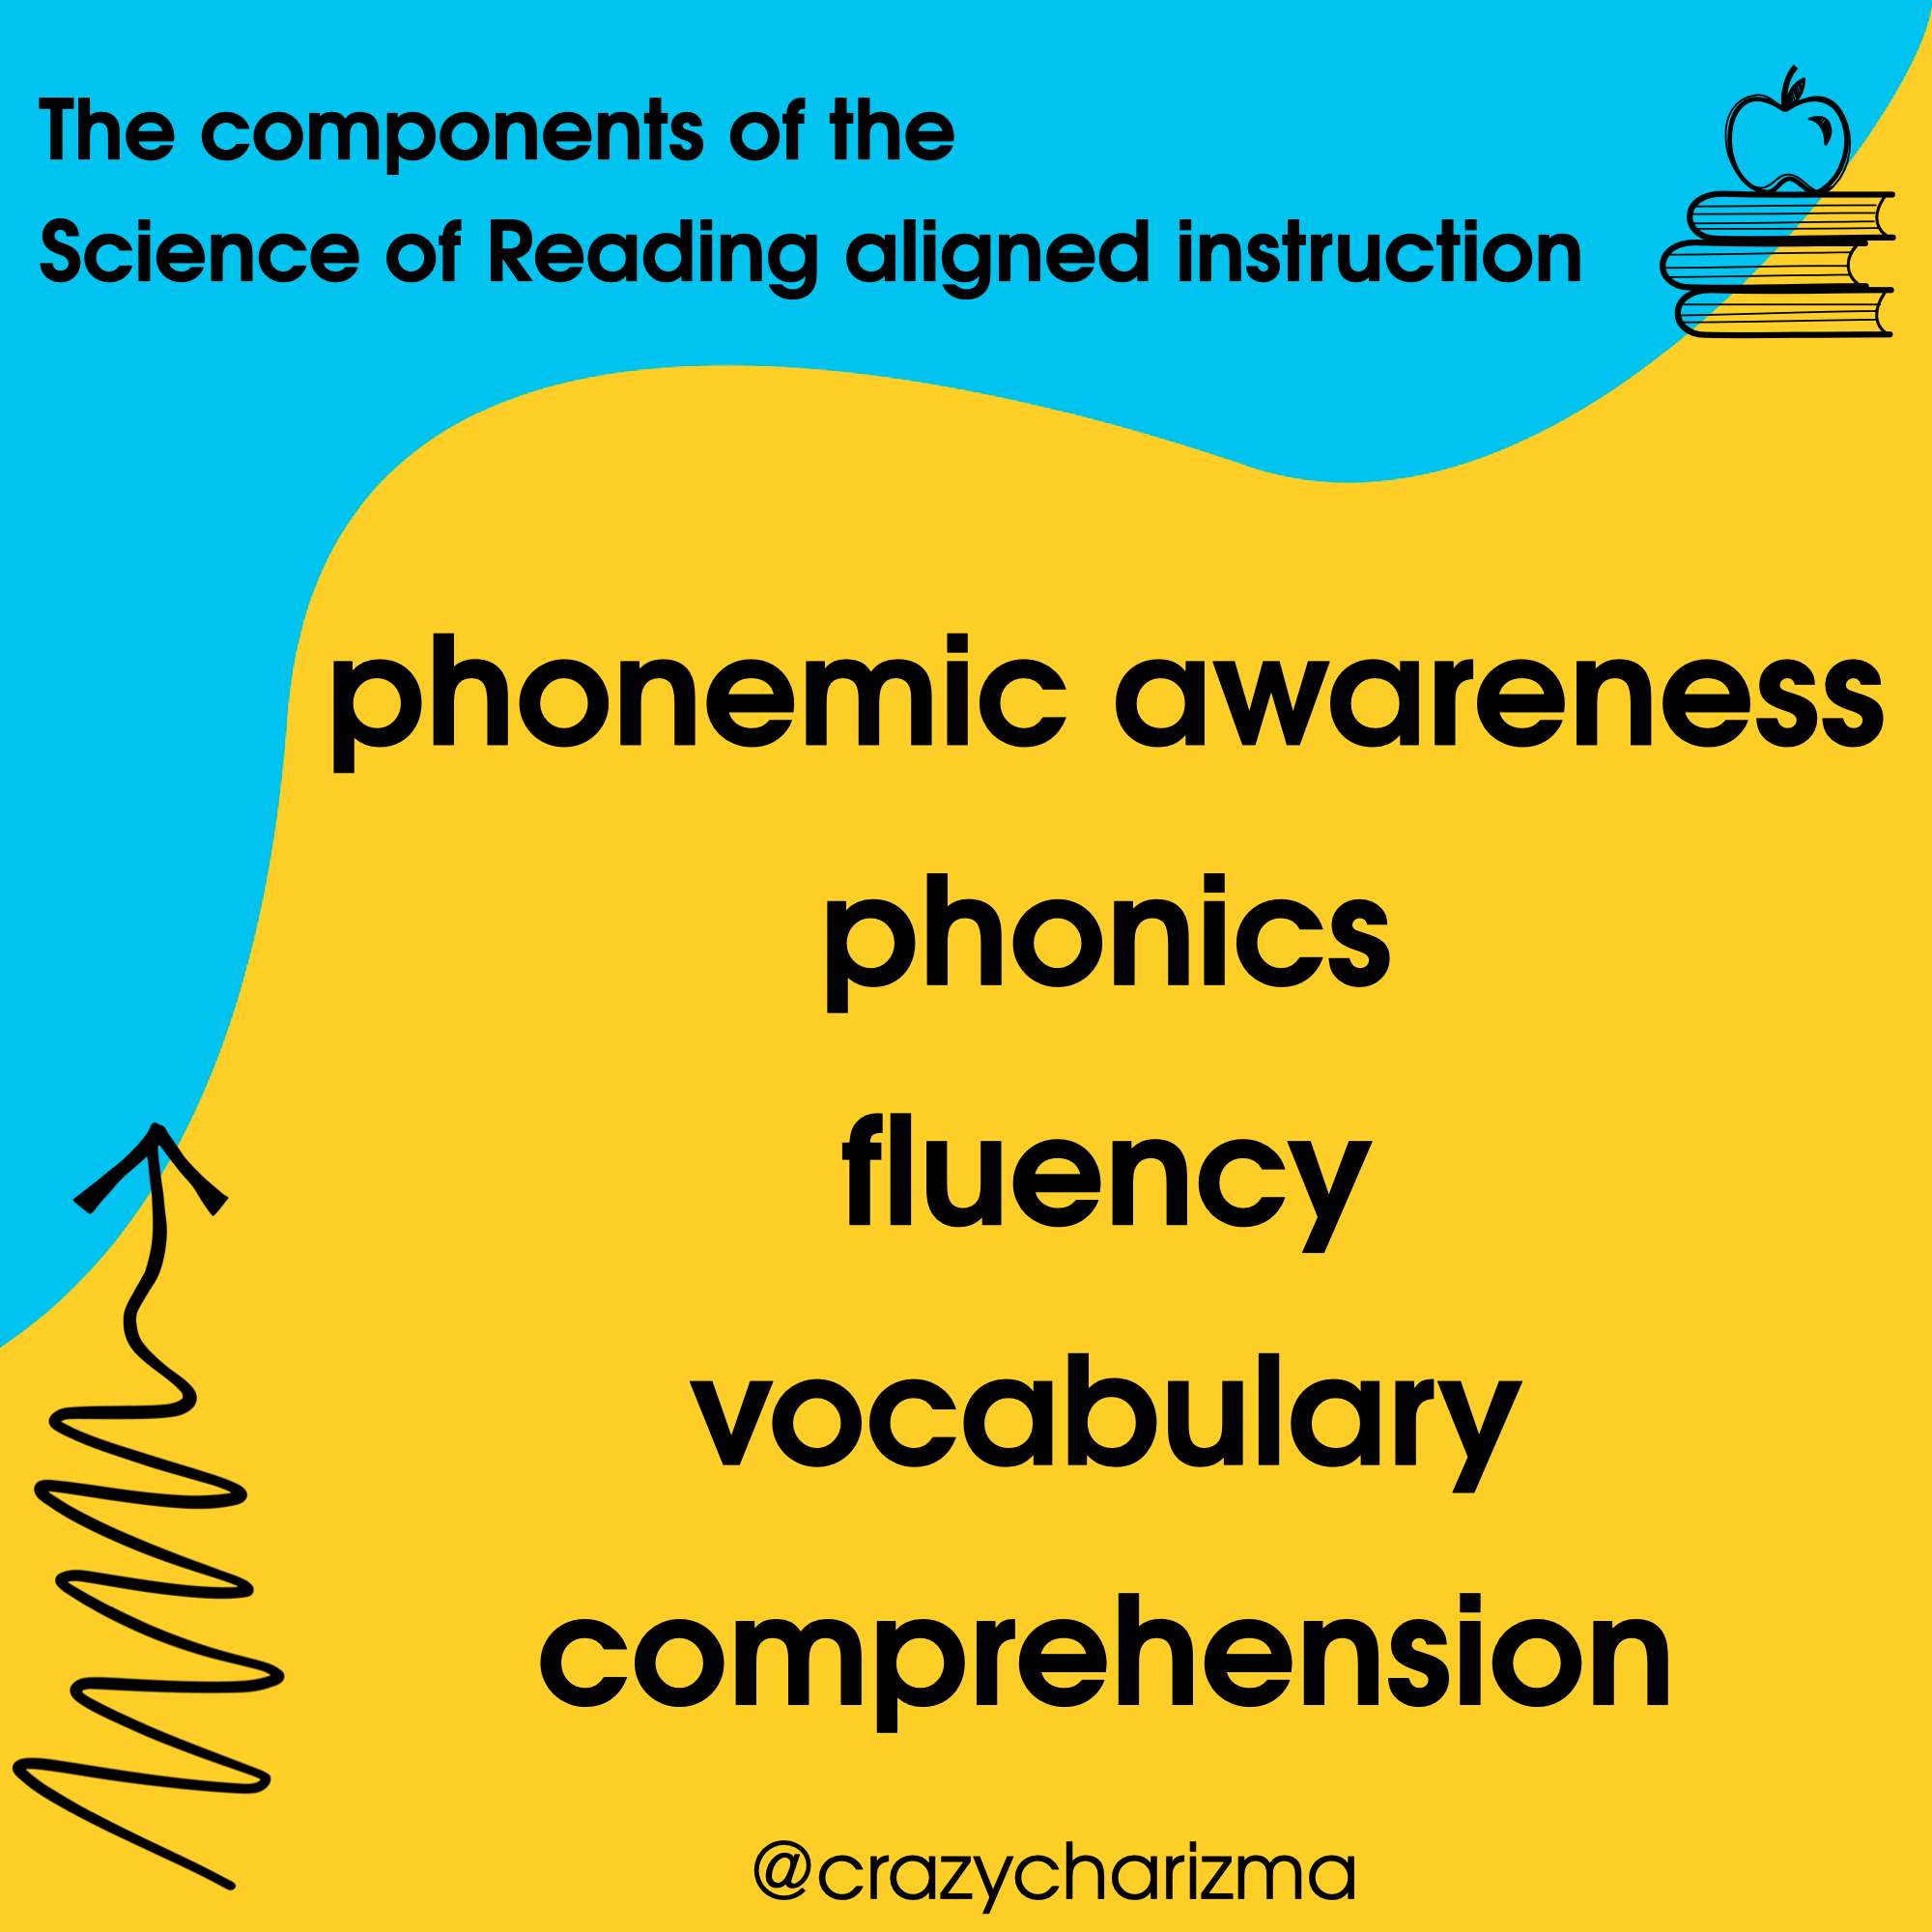 Components of the Science of Reading aligned instruction